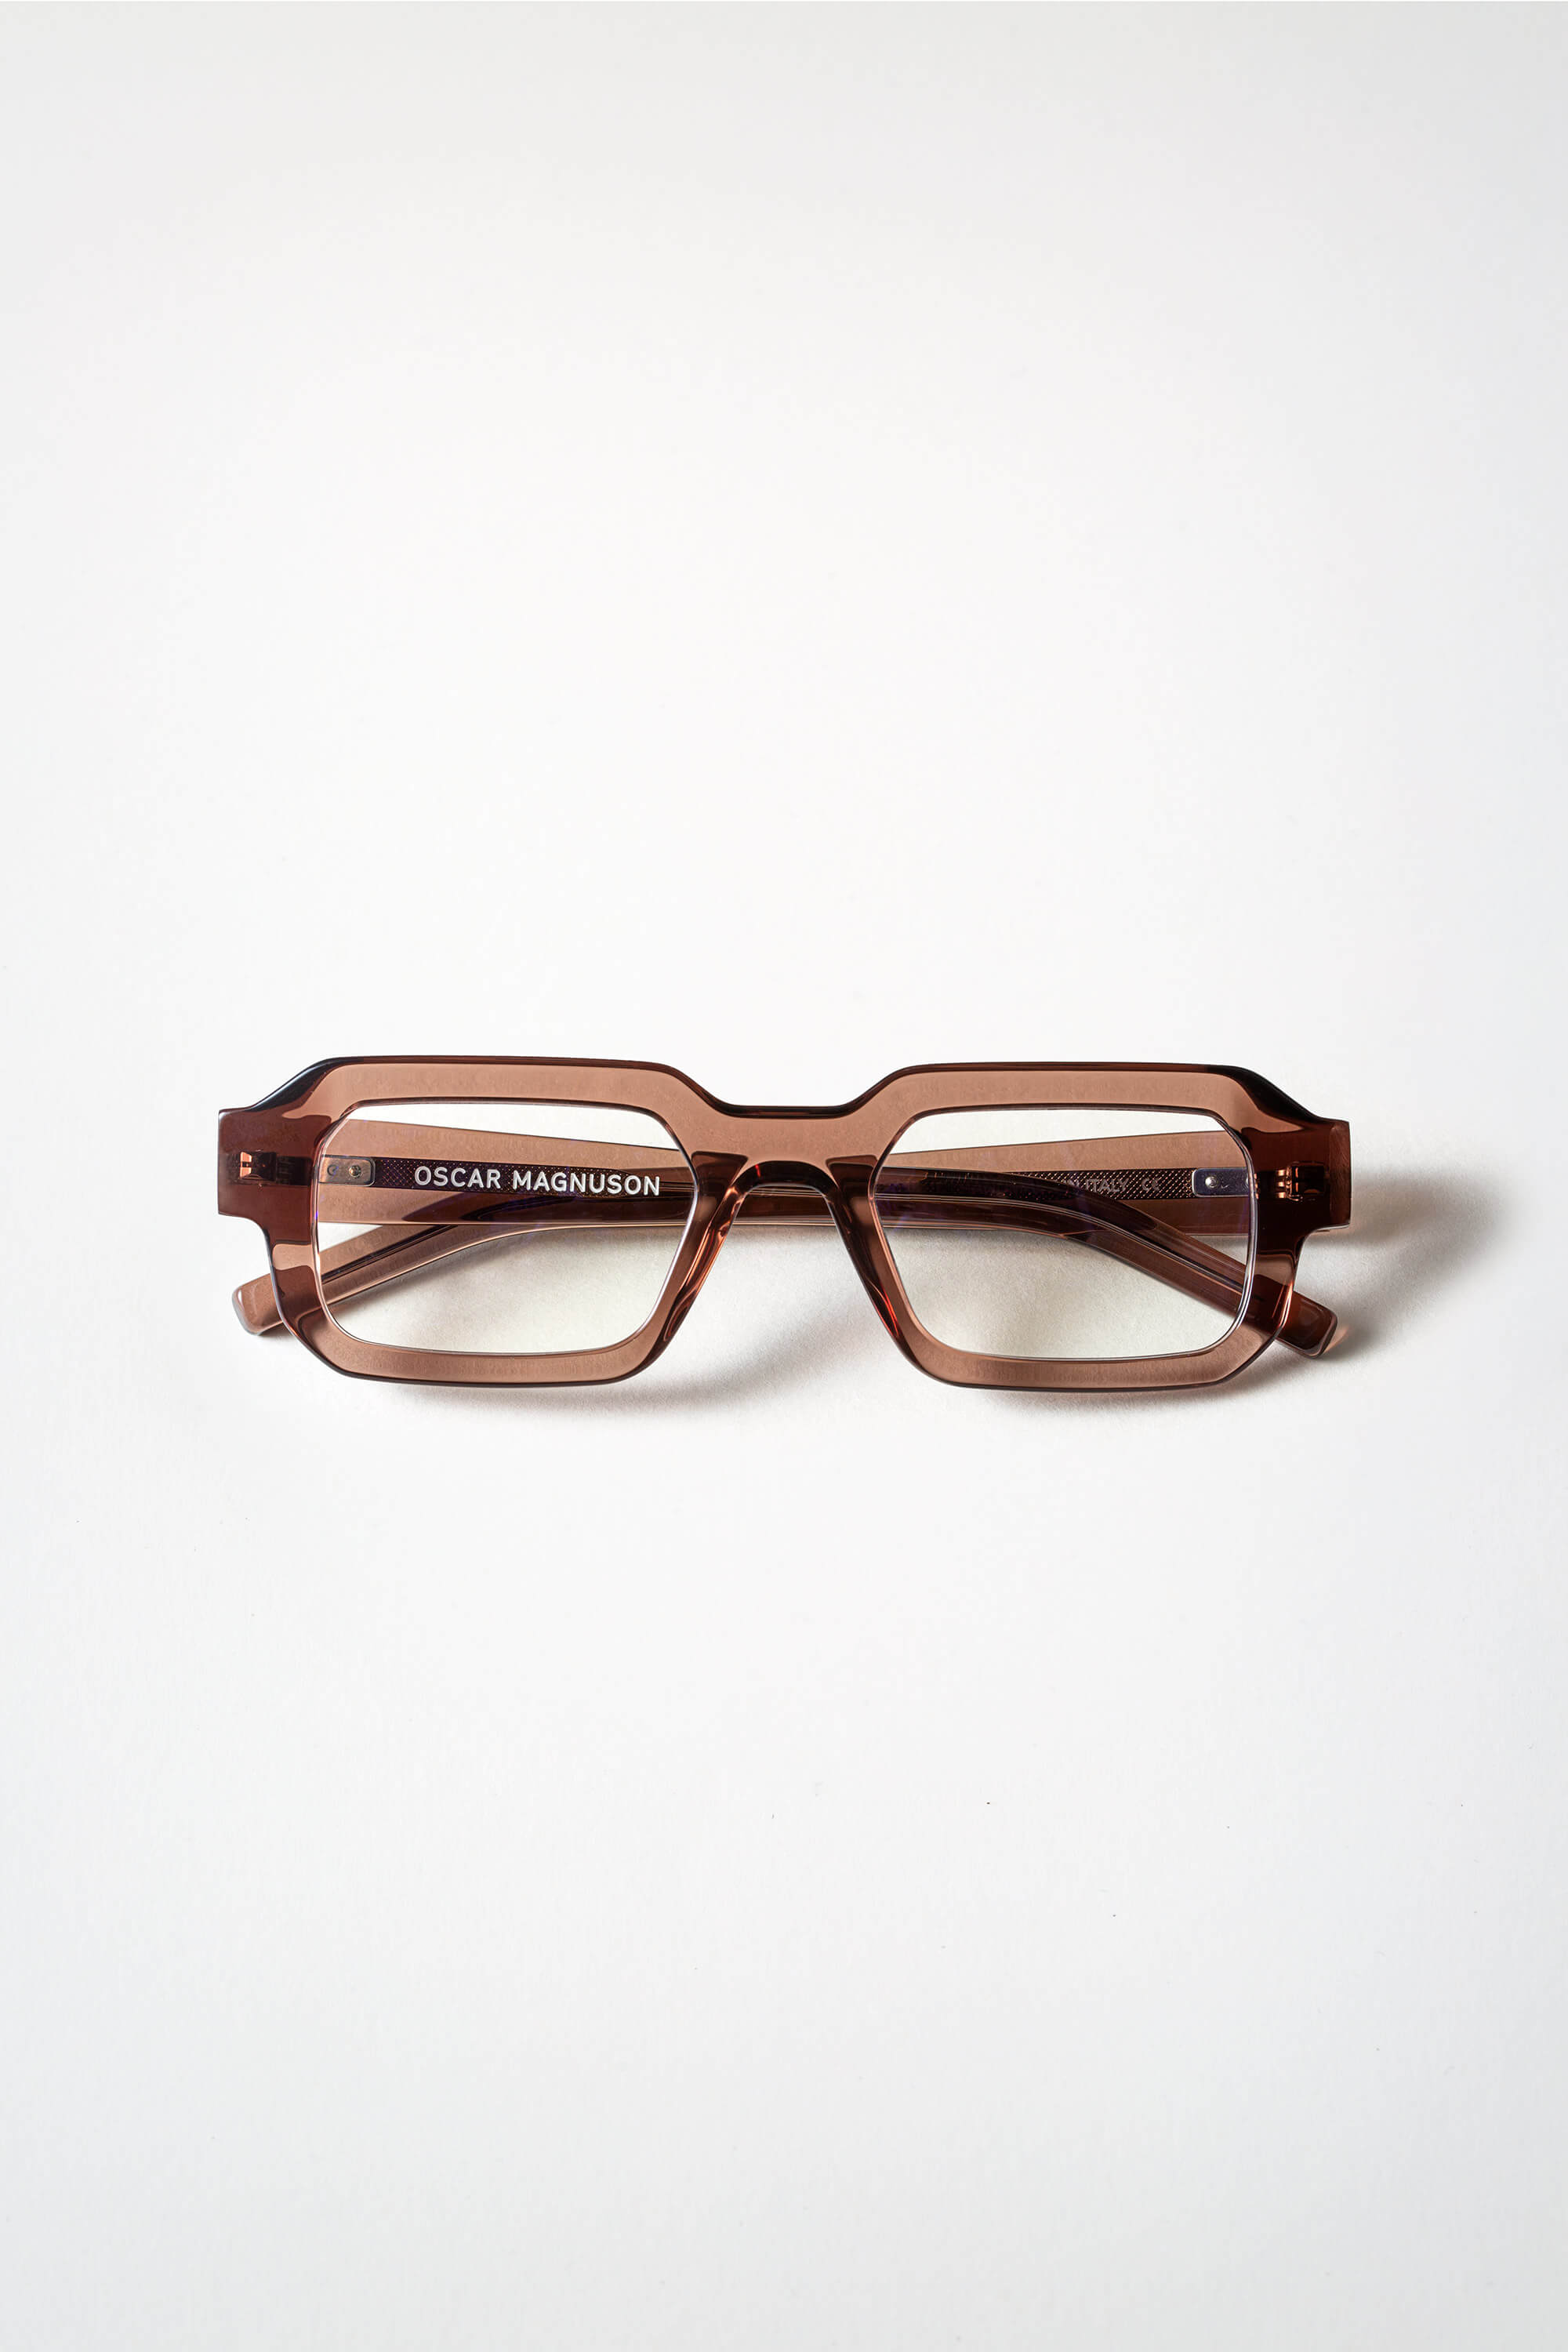 Products – Oscar Magnuson Spectacles